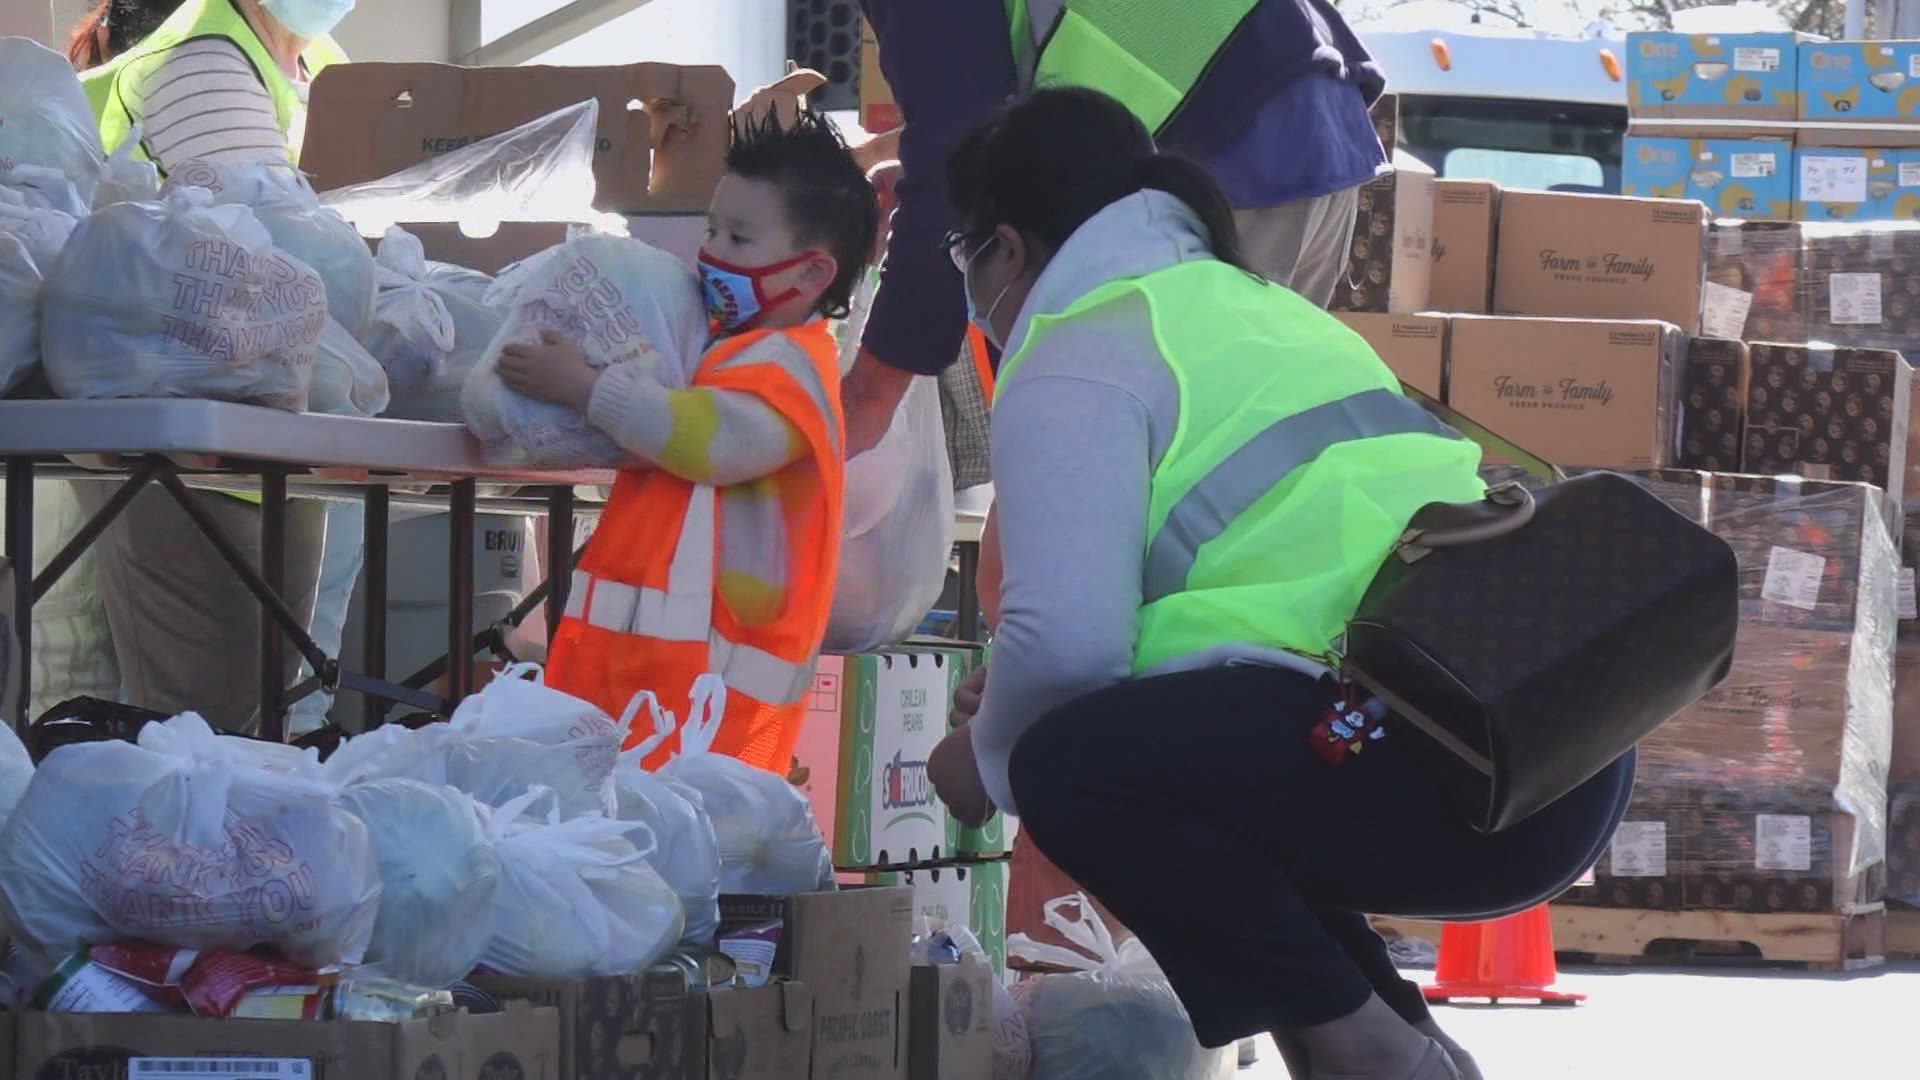 The multi-day, multi-city event coordinated by Lend a Hand brings multiple organizations together to help give two weeks of food to families in need.